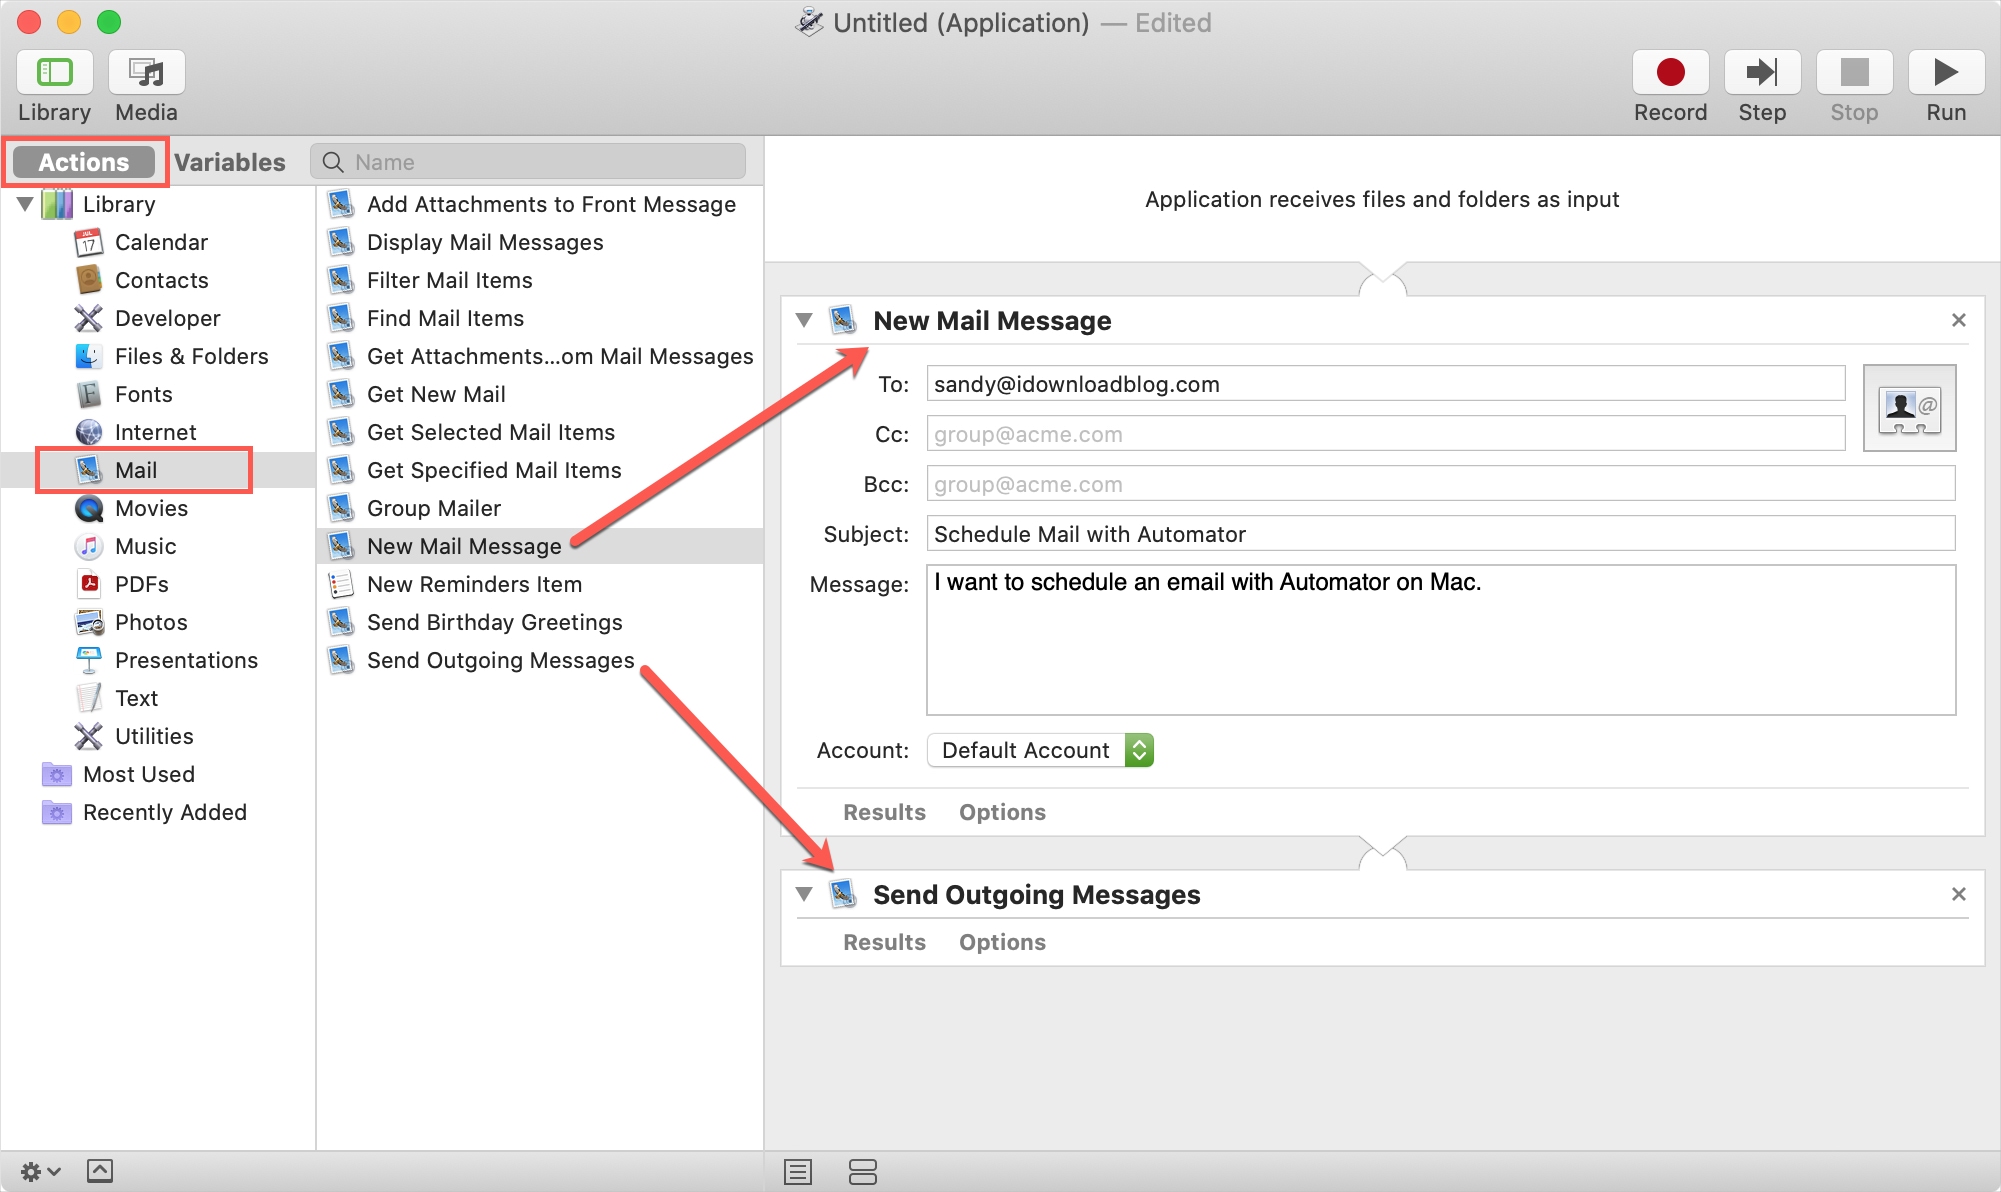 Automator New Mail Message and Send Outgoing Messages